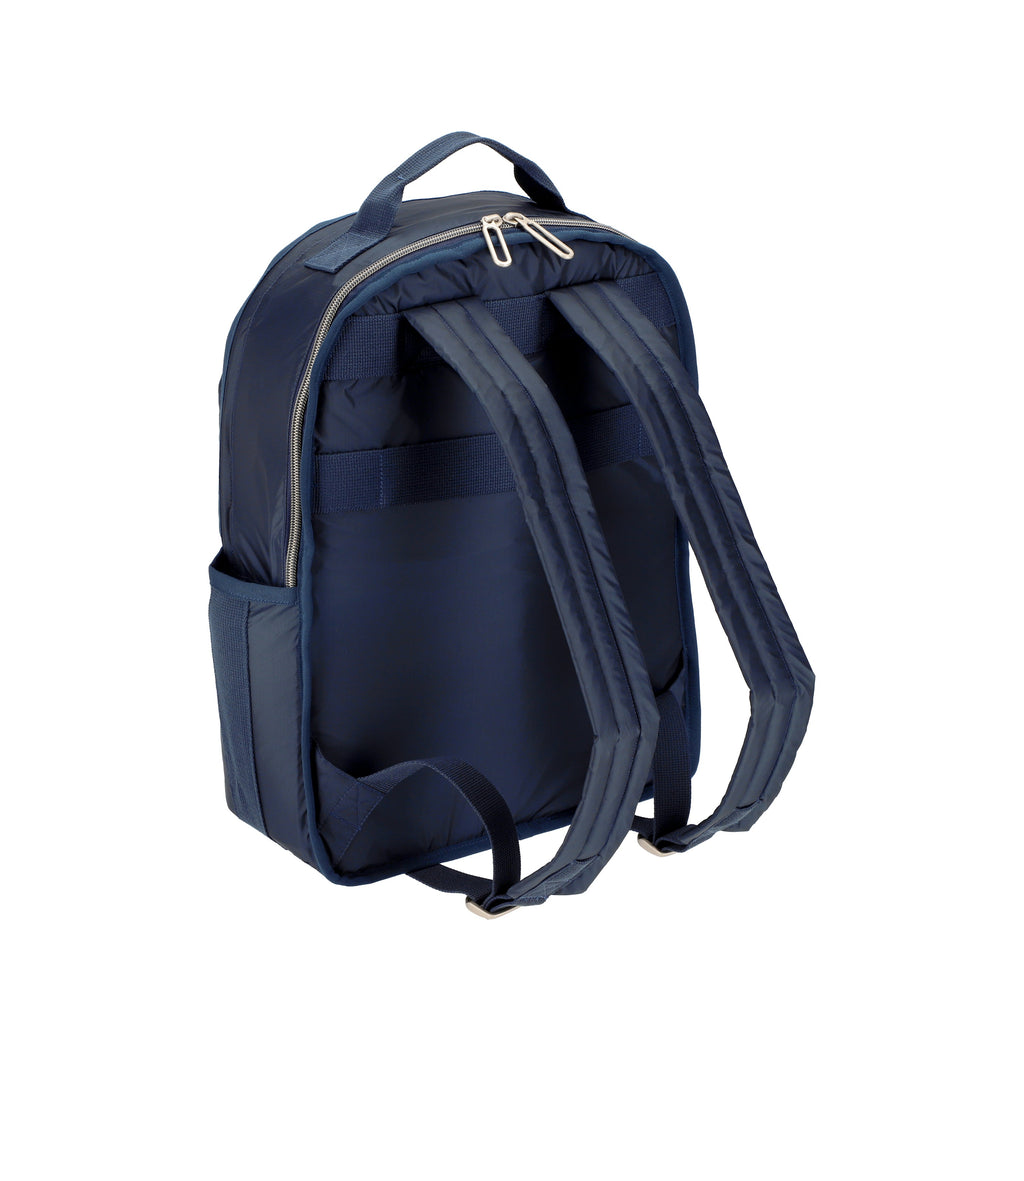 Essential Carryall Backpack - 23976601255984